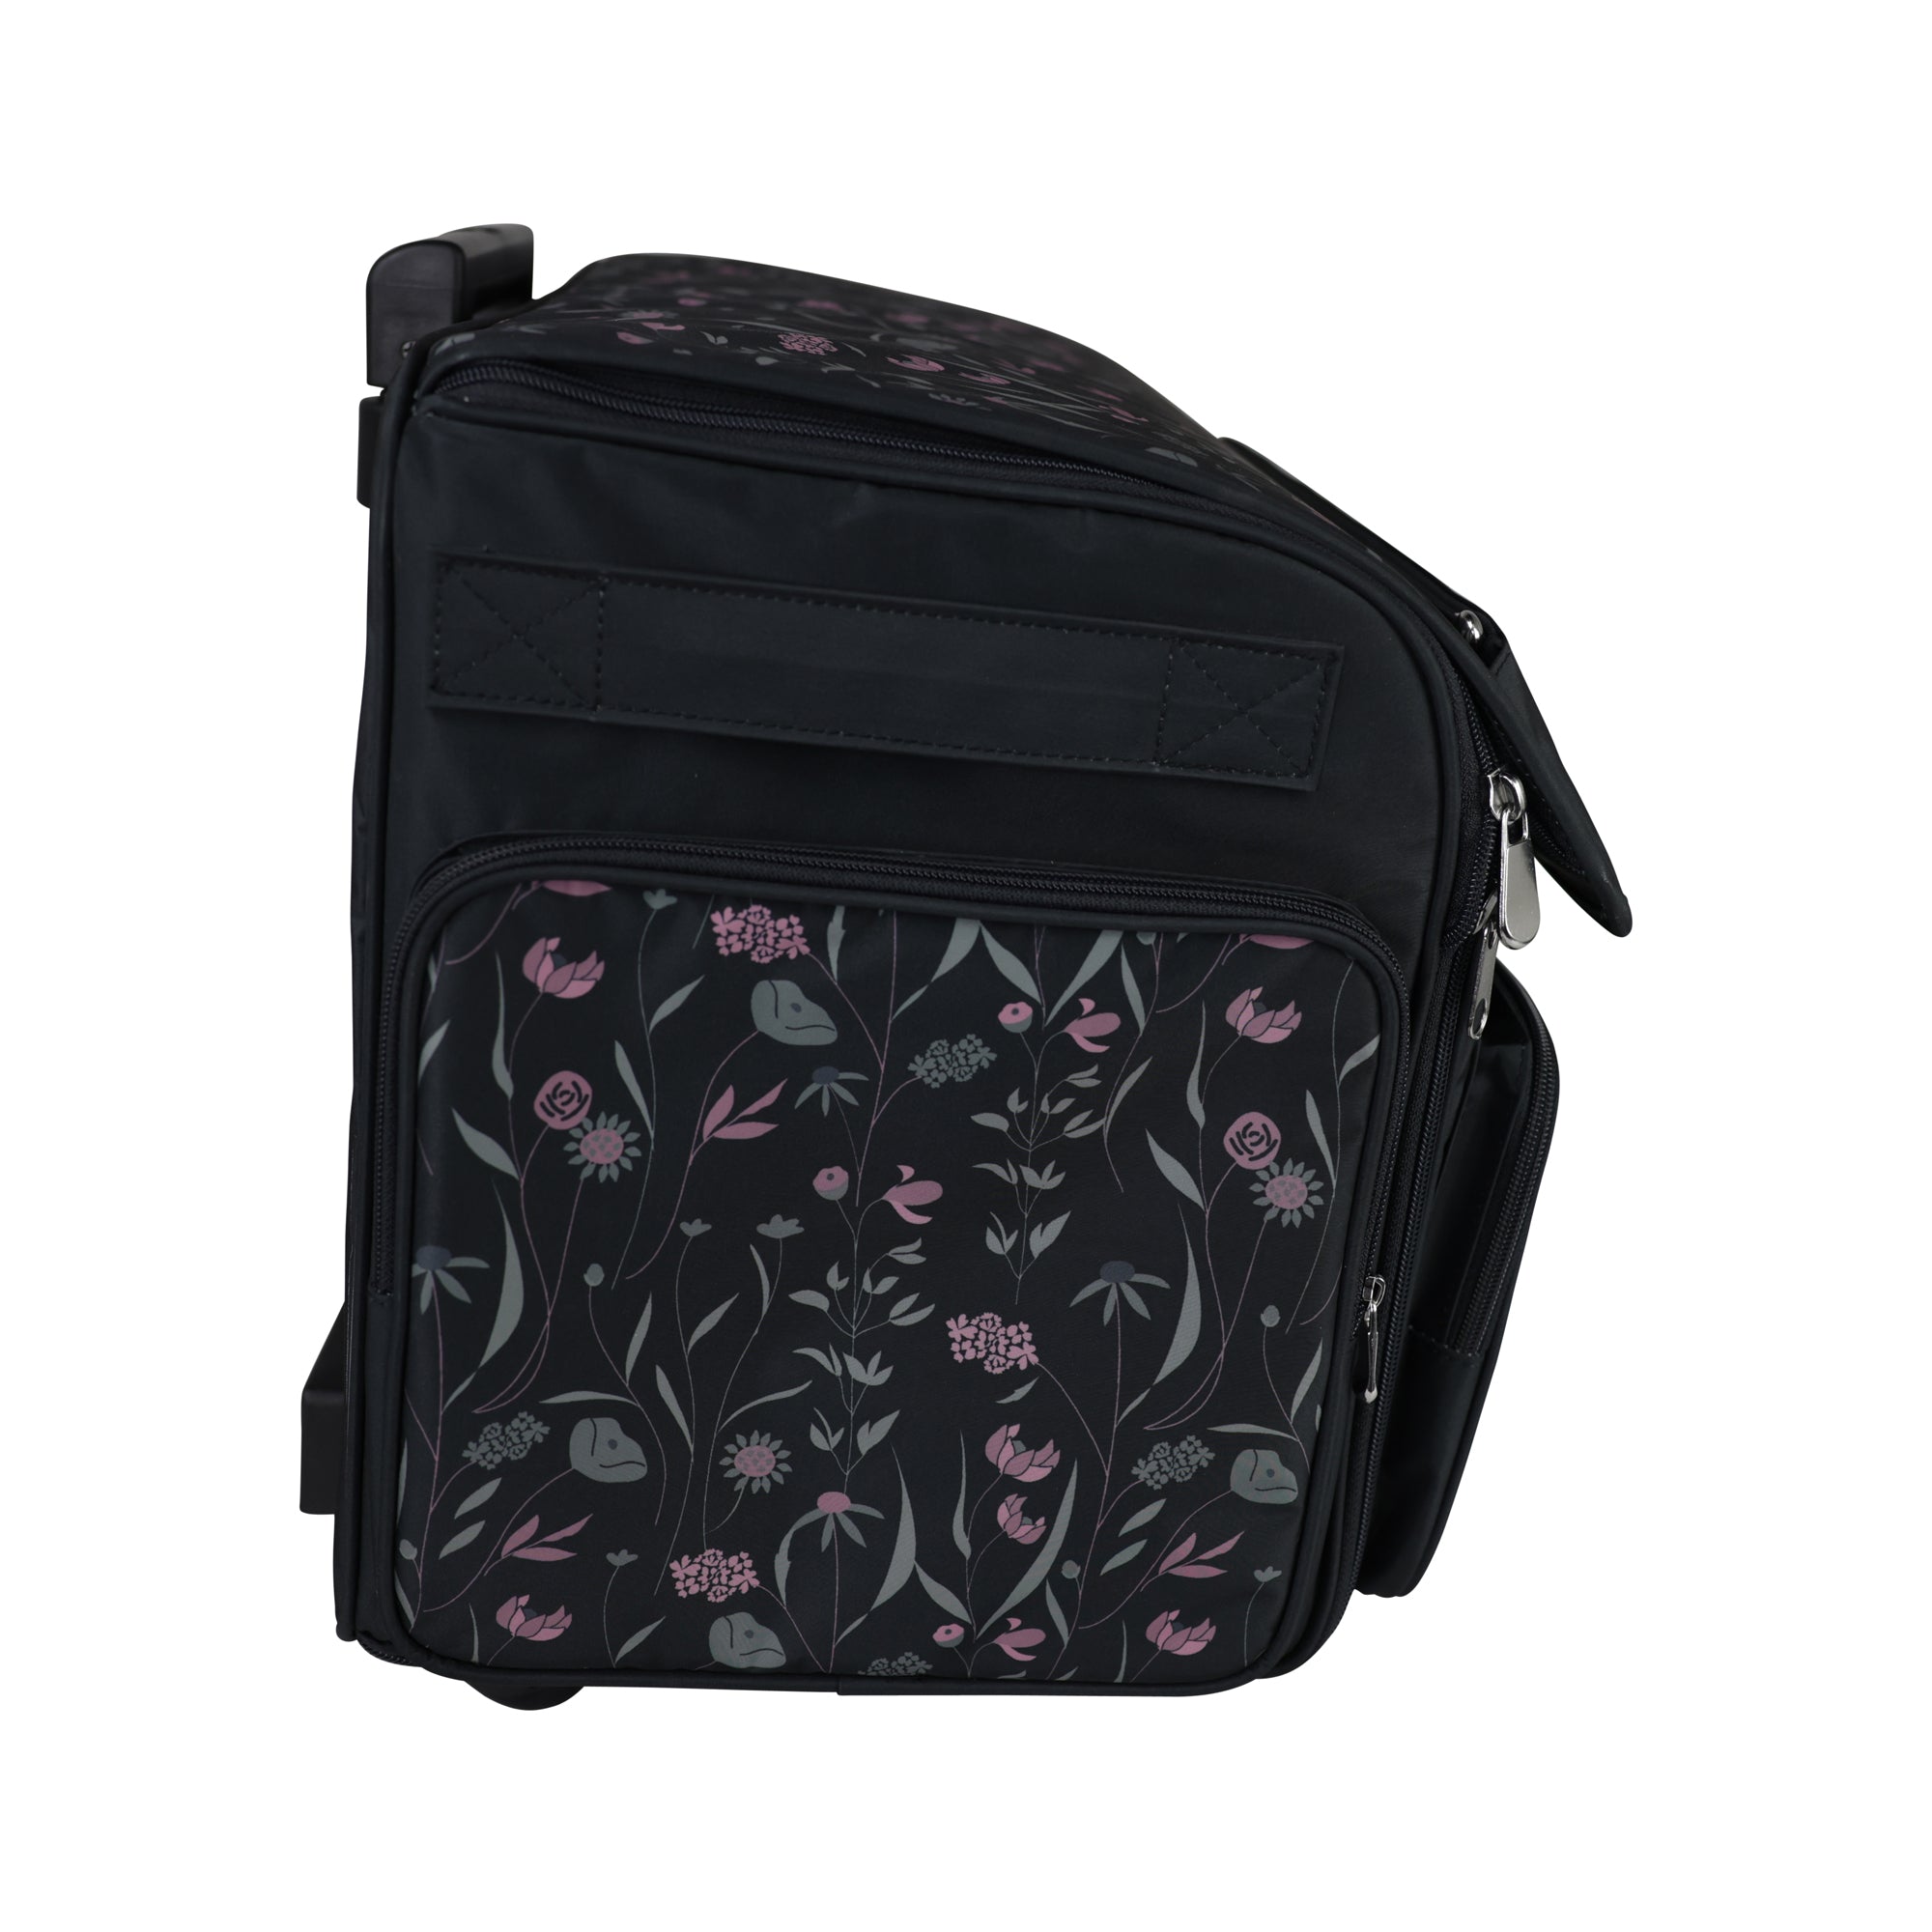 XXL Deluxe Rolling Sewing Machine Case, Black & Floral - Everything Mary